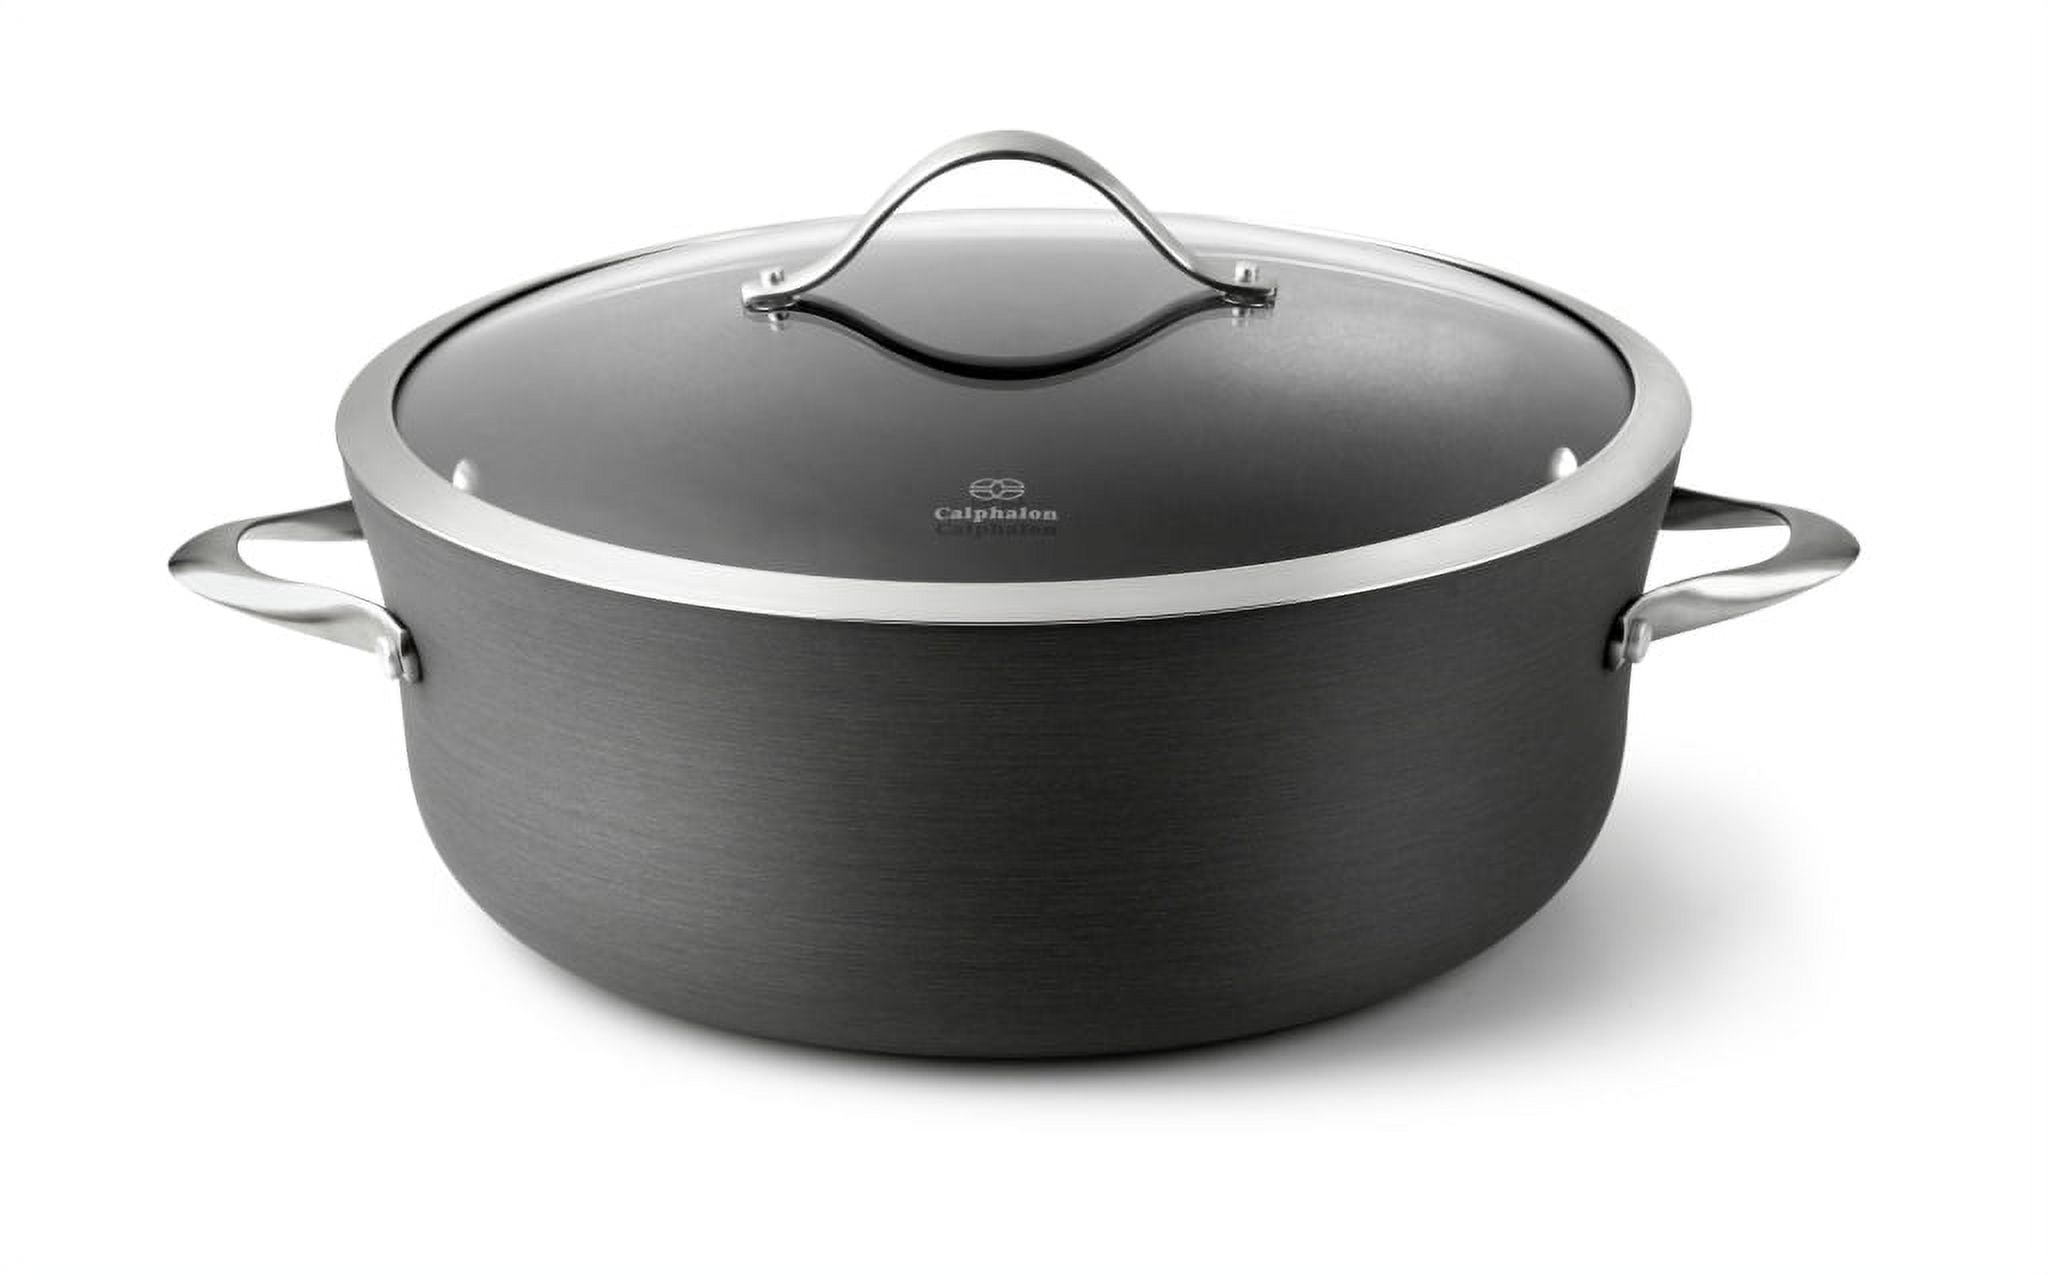 Calphalon Select Hard-Anodized Nonstick 5 QT Dutch Oven with Cover - Shop Dutch  Ovens at H-E-B